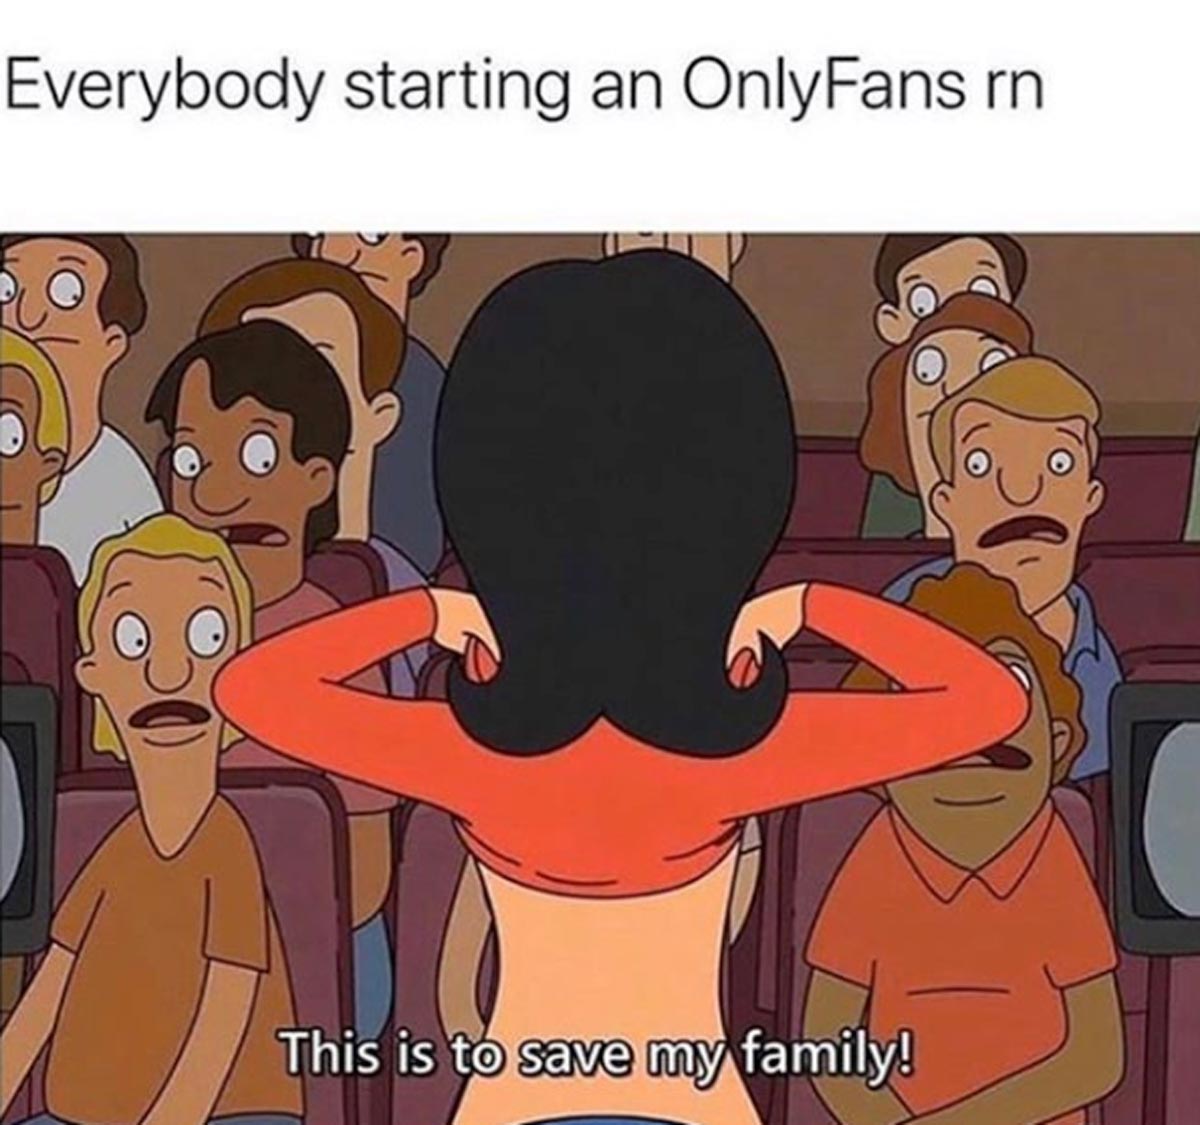 funny sex memes - save my family bob's burgers - Everybody starting an OnlyFans rn This is to save my family!